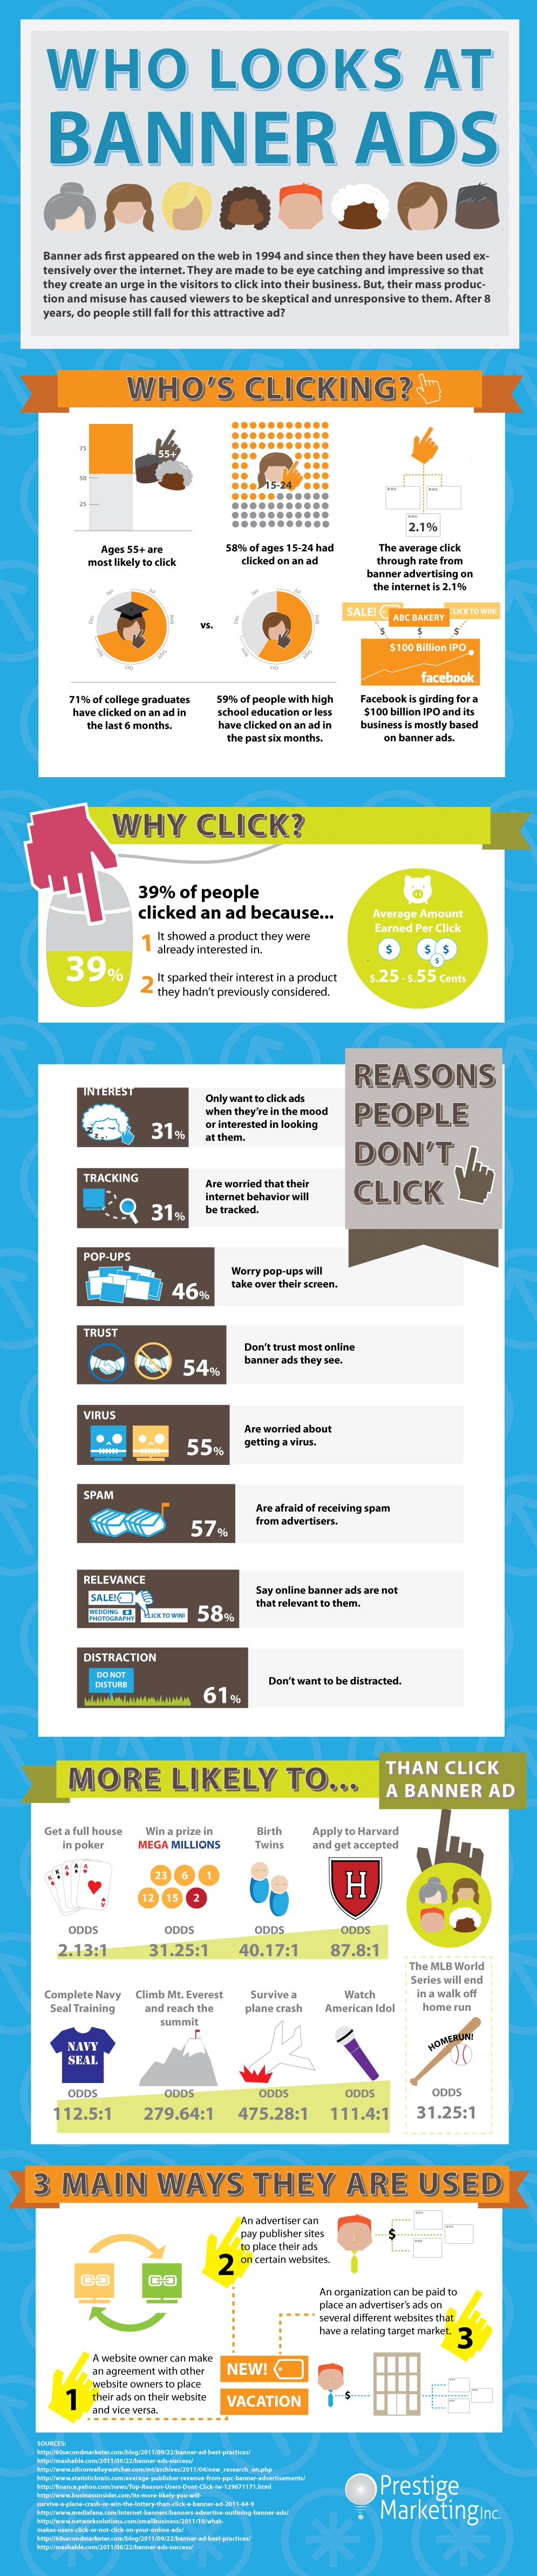 Science Behind Who Clicks On Your Banner Ads & Why [Infographic]